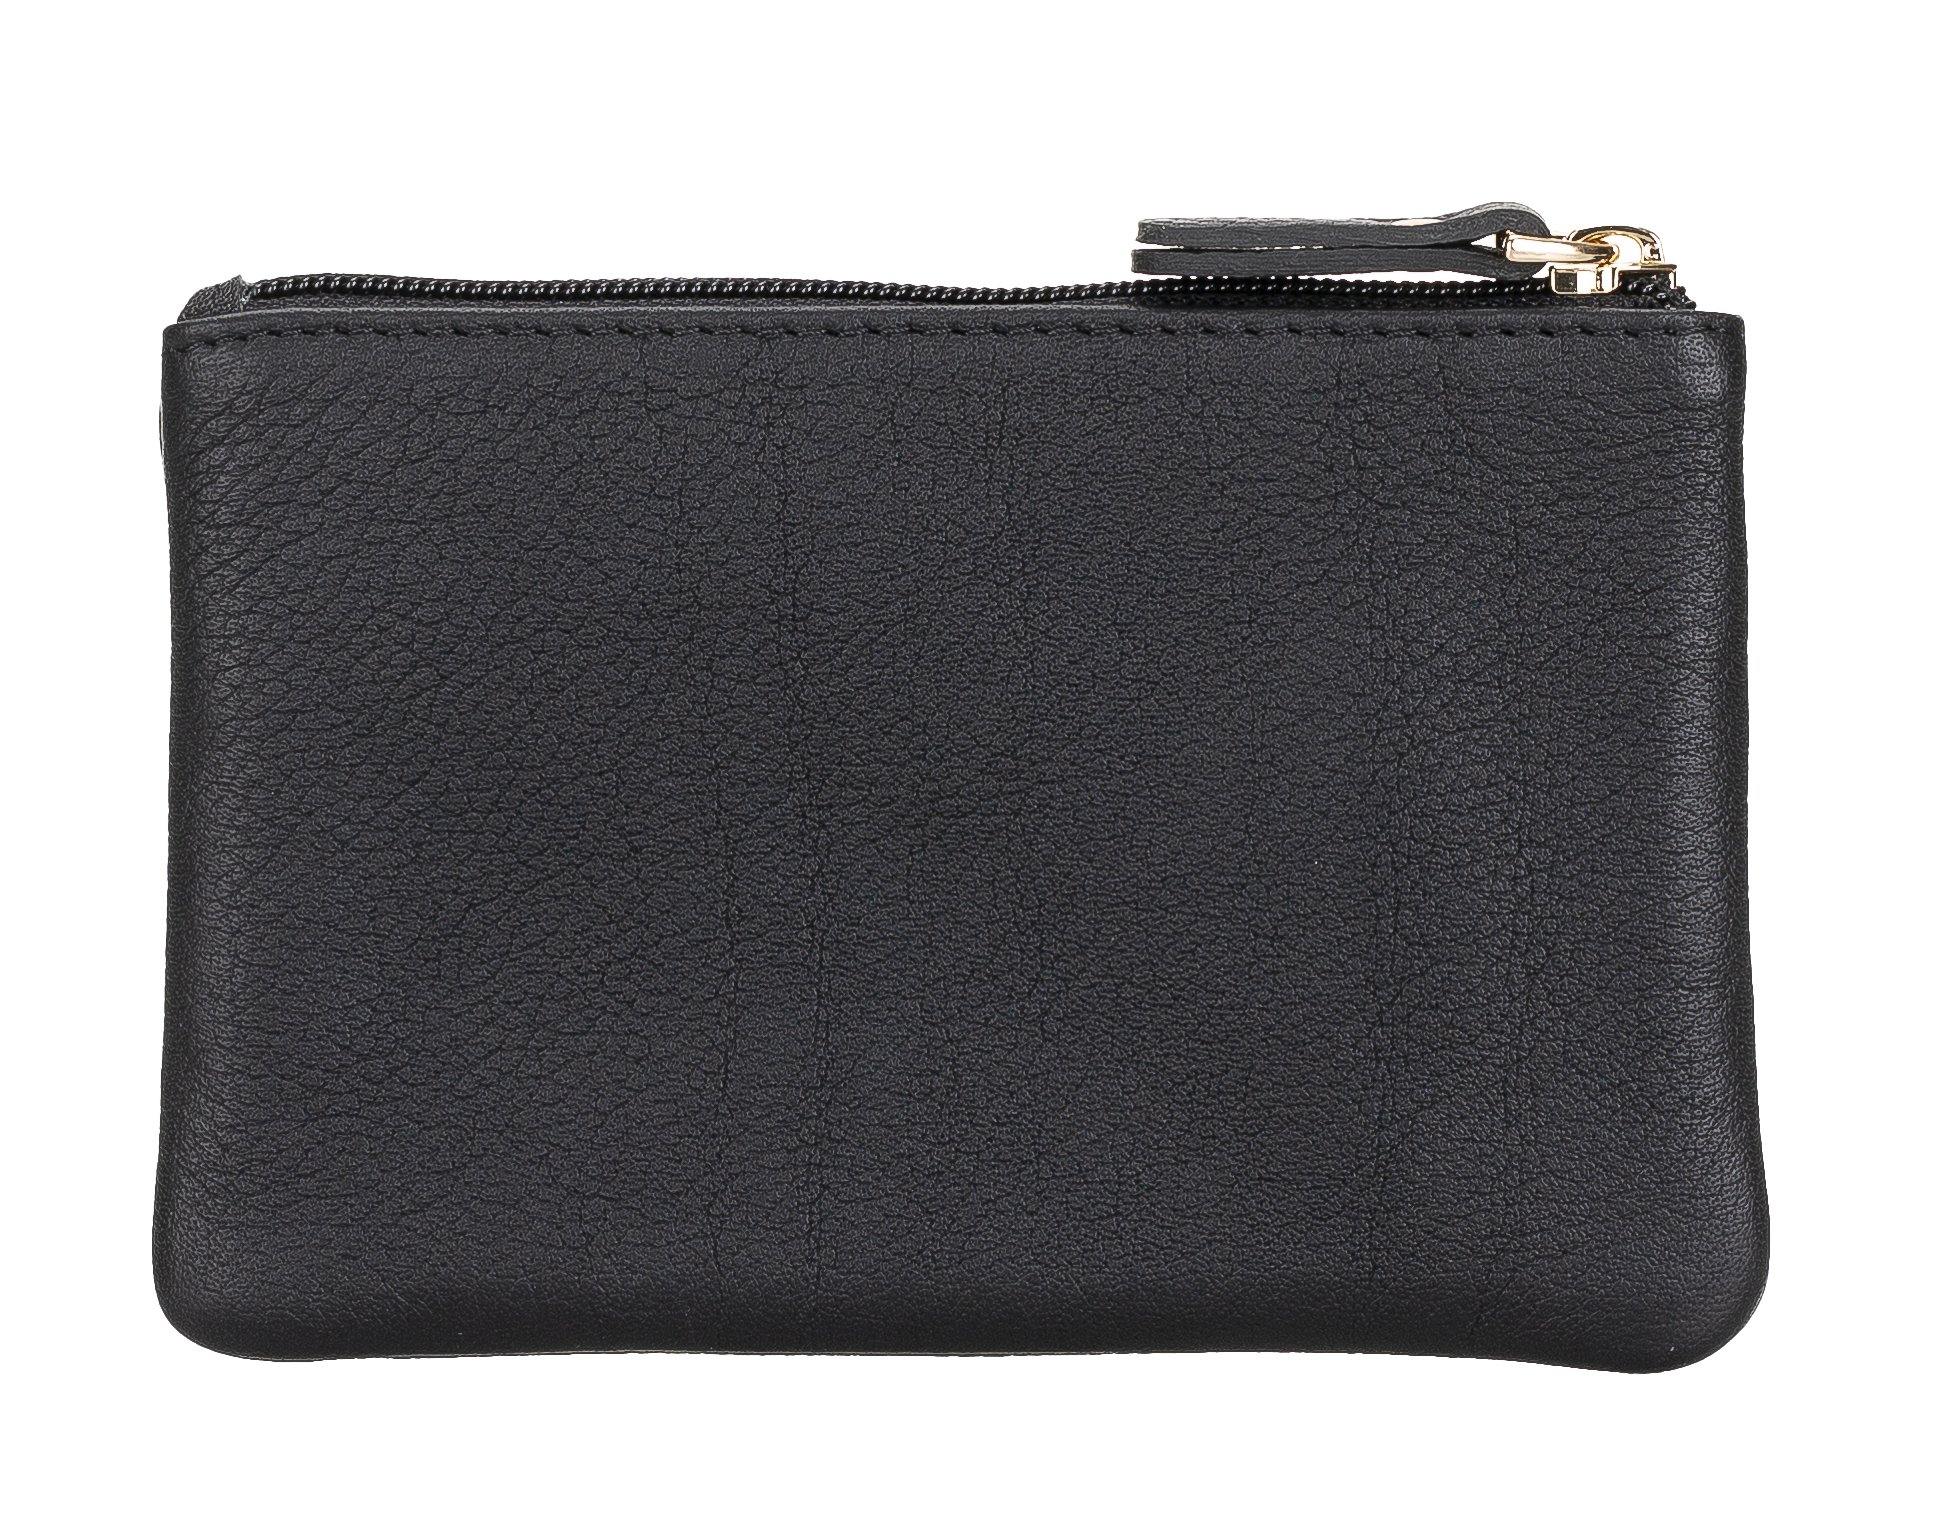 Genuine leather purse, clutch bag | personalised with your initials or name - PersonalisebyLisa